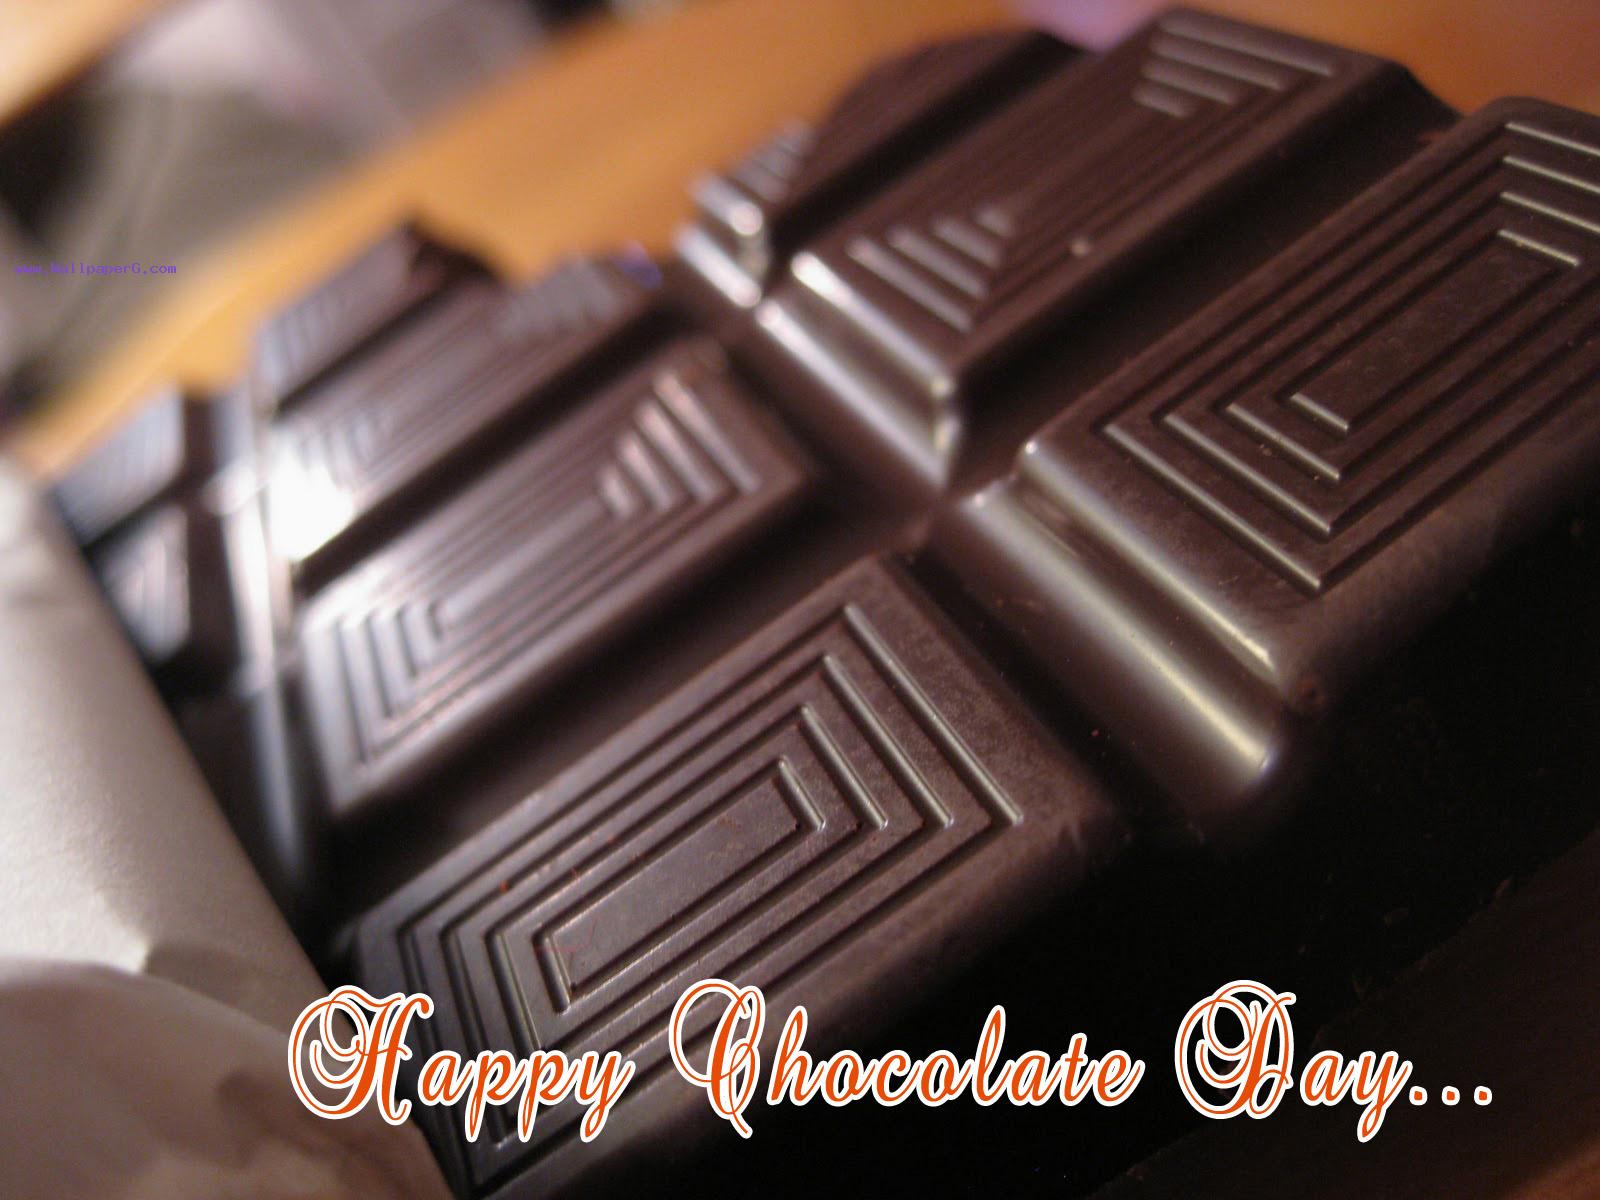 Download Happy Chocolate Day 01 Wallpaper For Mobile - Hd Image Of Chocolate Day , HD Wallpaper & Backgrounds